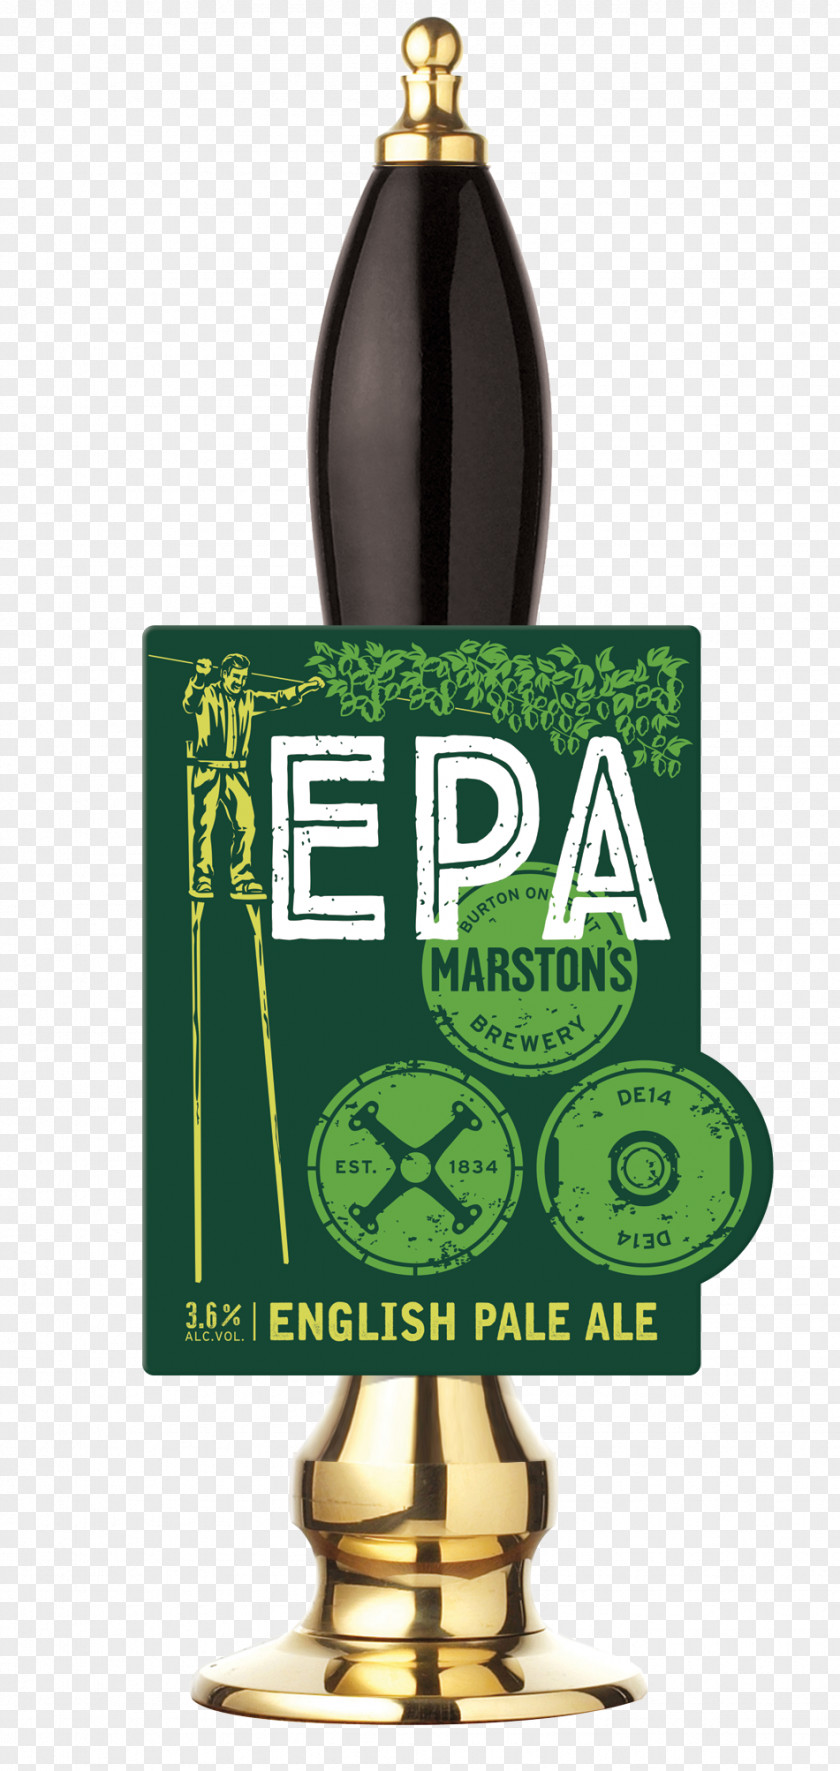 Bottle Marston's Brewery Font PNG